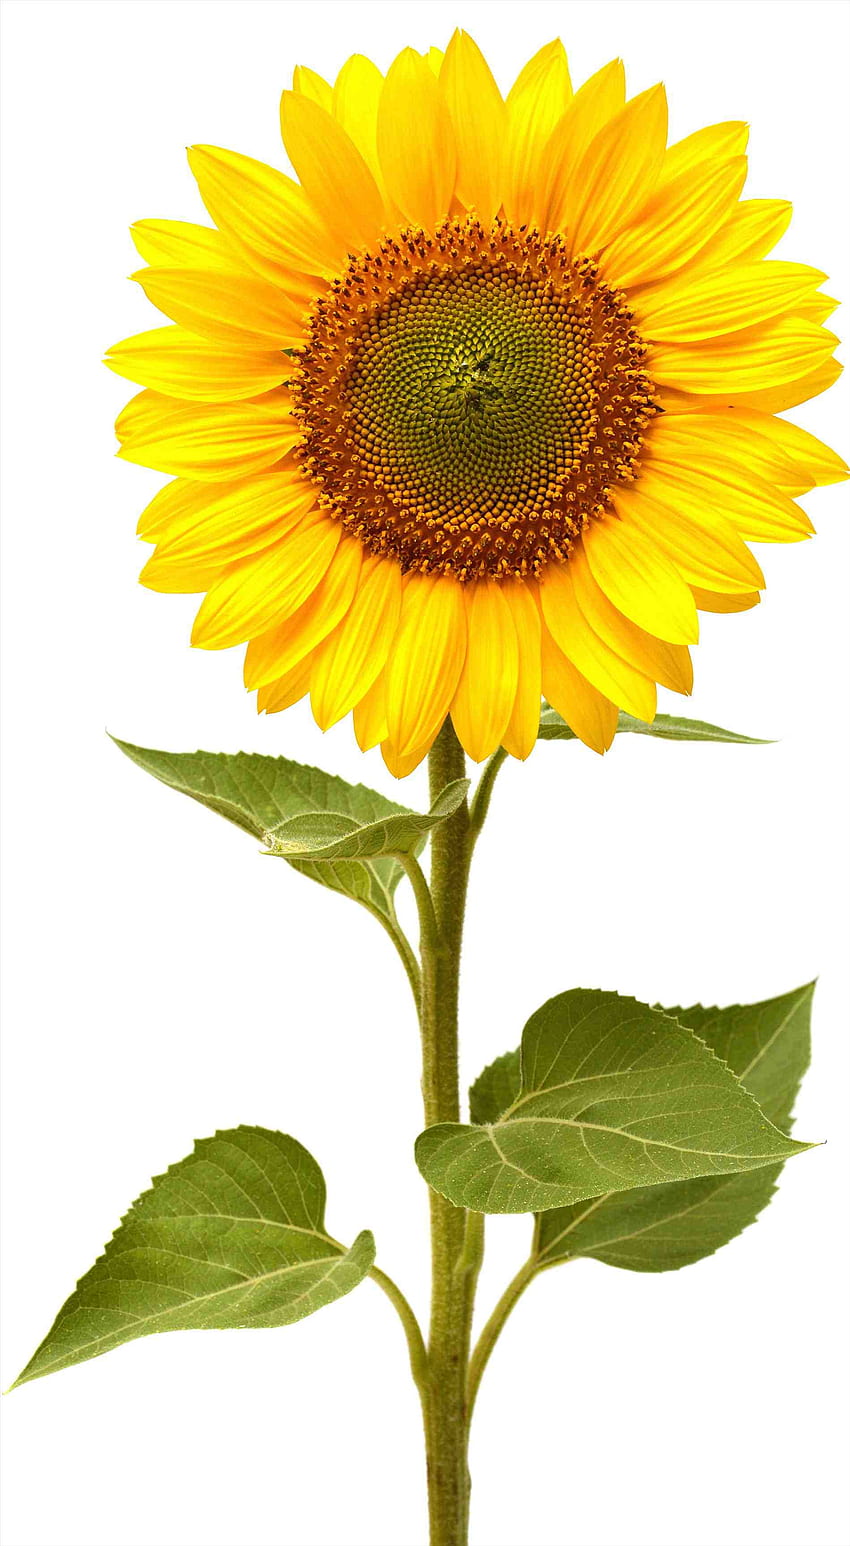 How to Draw a Sunflower (in 10 Easy Steps) - FeltMagnet